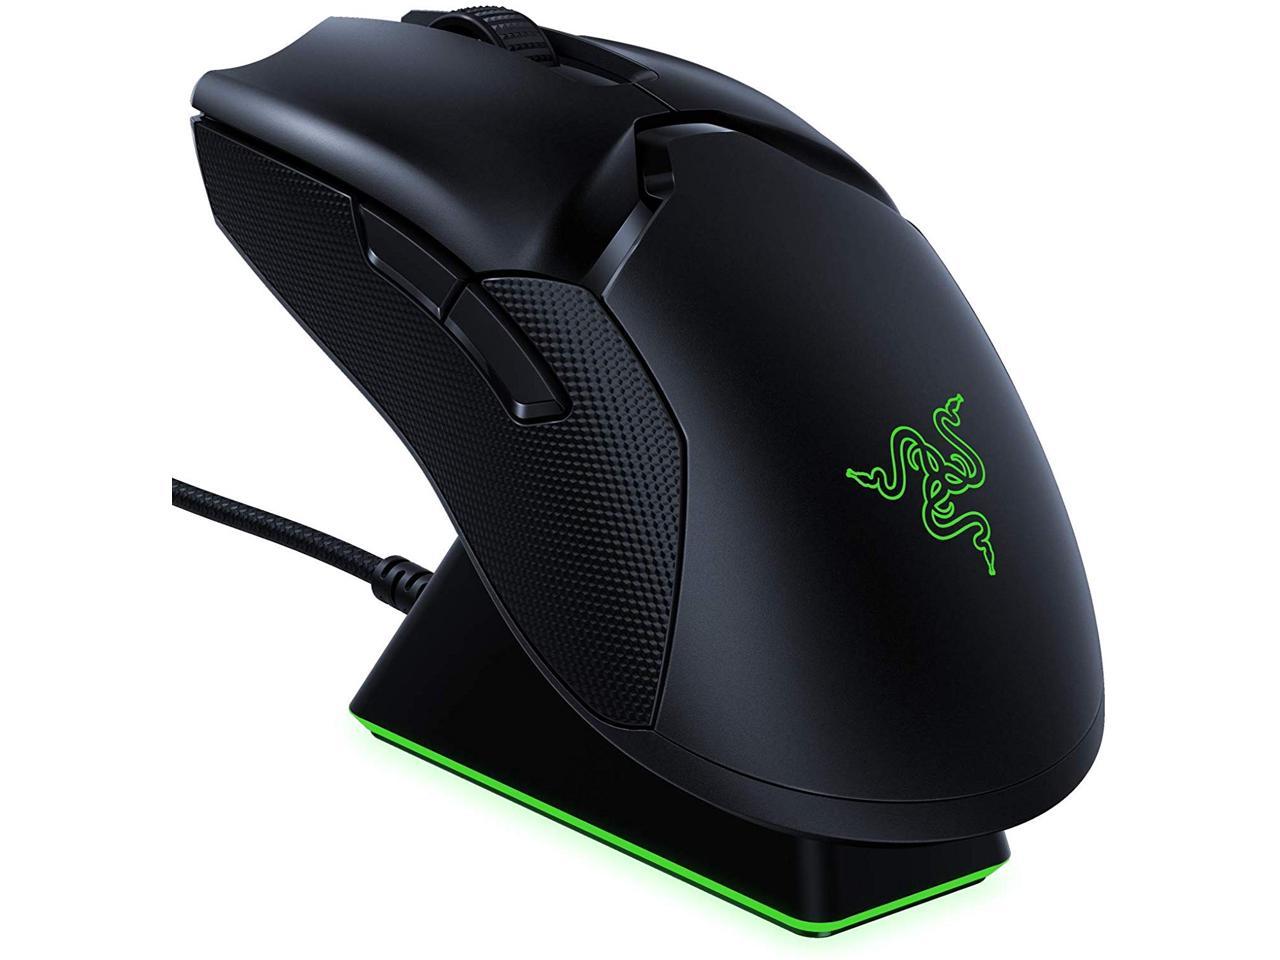 Razer Viper Ultimate Hyperspeed Lightest Wireless Gaming Mouse Rgb Charging Dock Fastest Gaming Mouse Switch k Dpi Optical Sensor Chroma Lighting 8 Programmable Buttons 70 Hr Battery Newegg Com